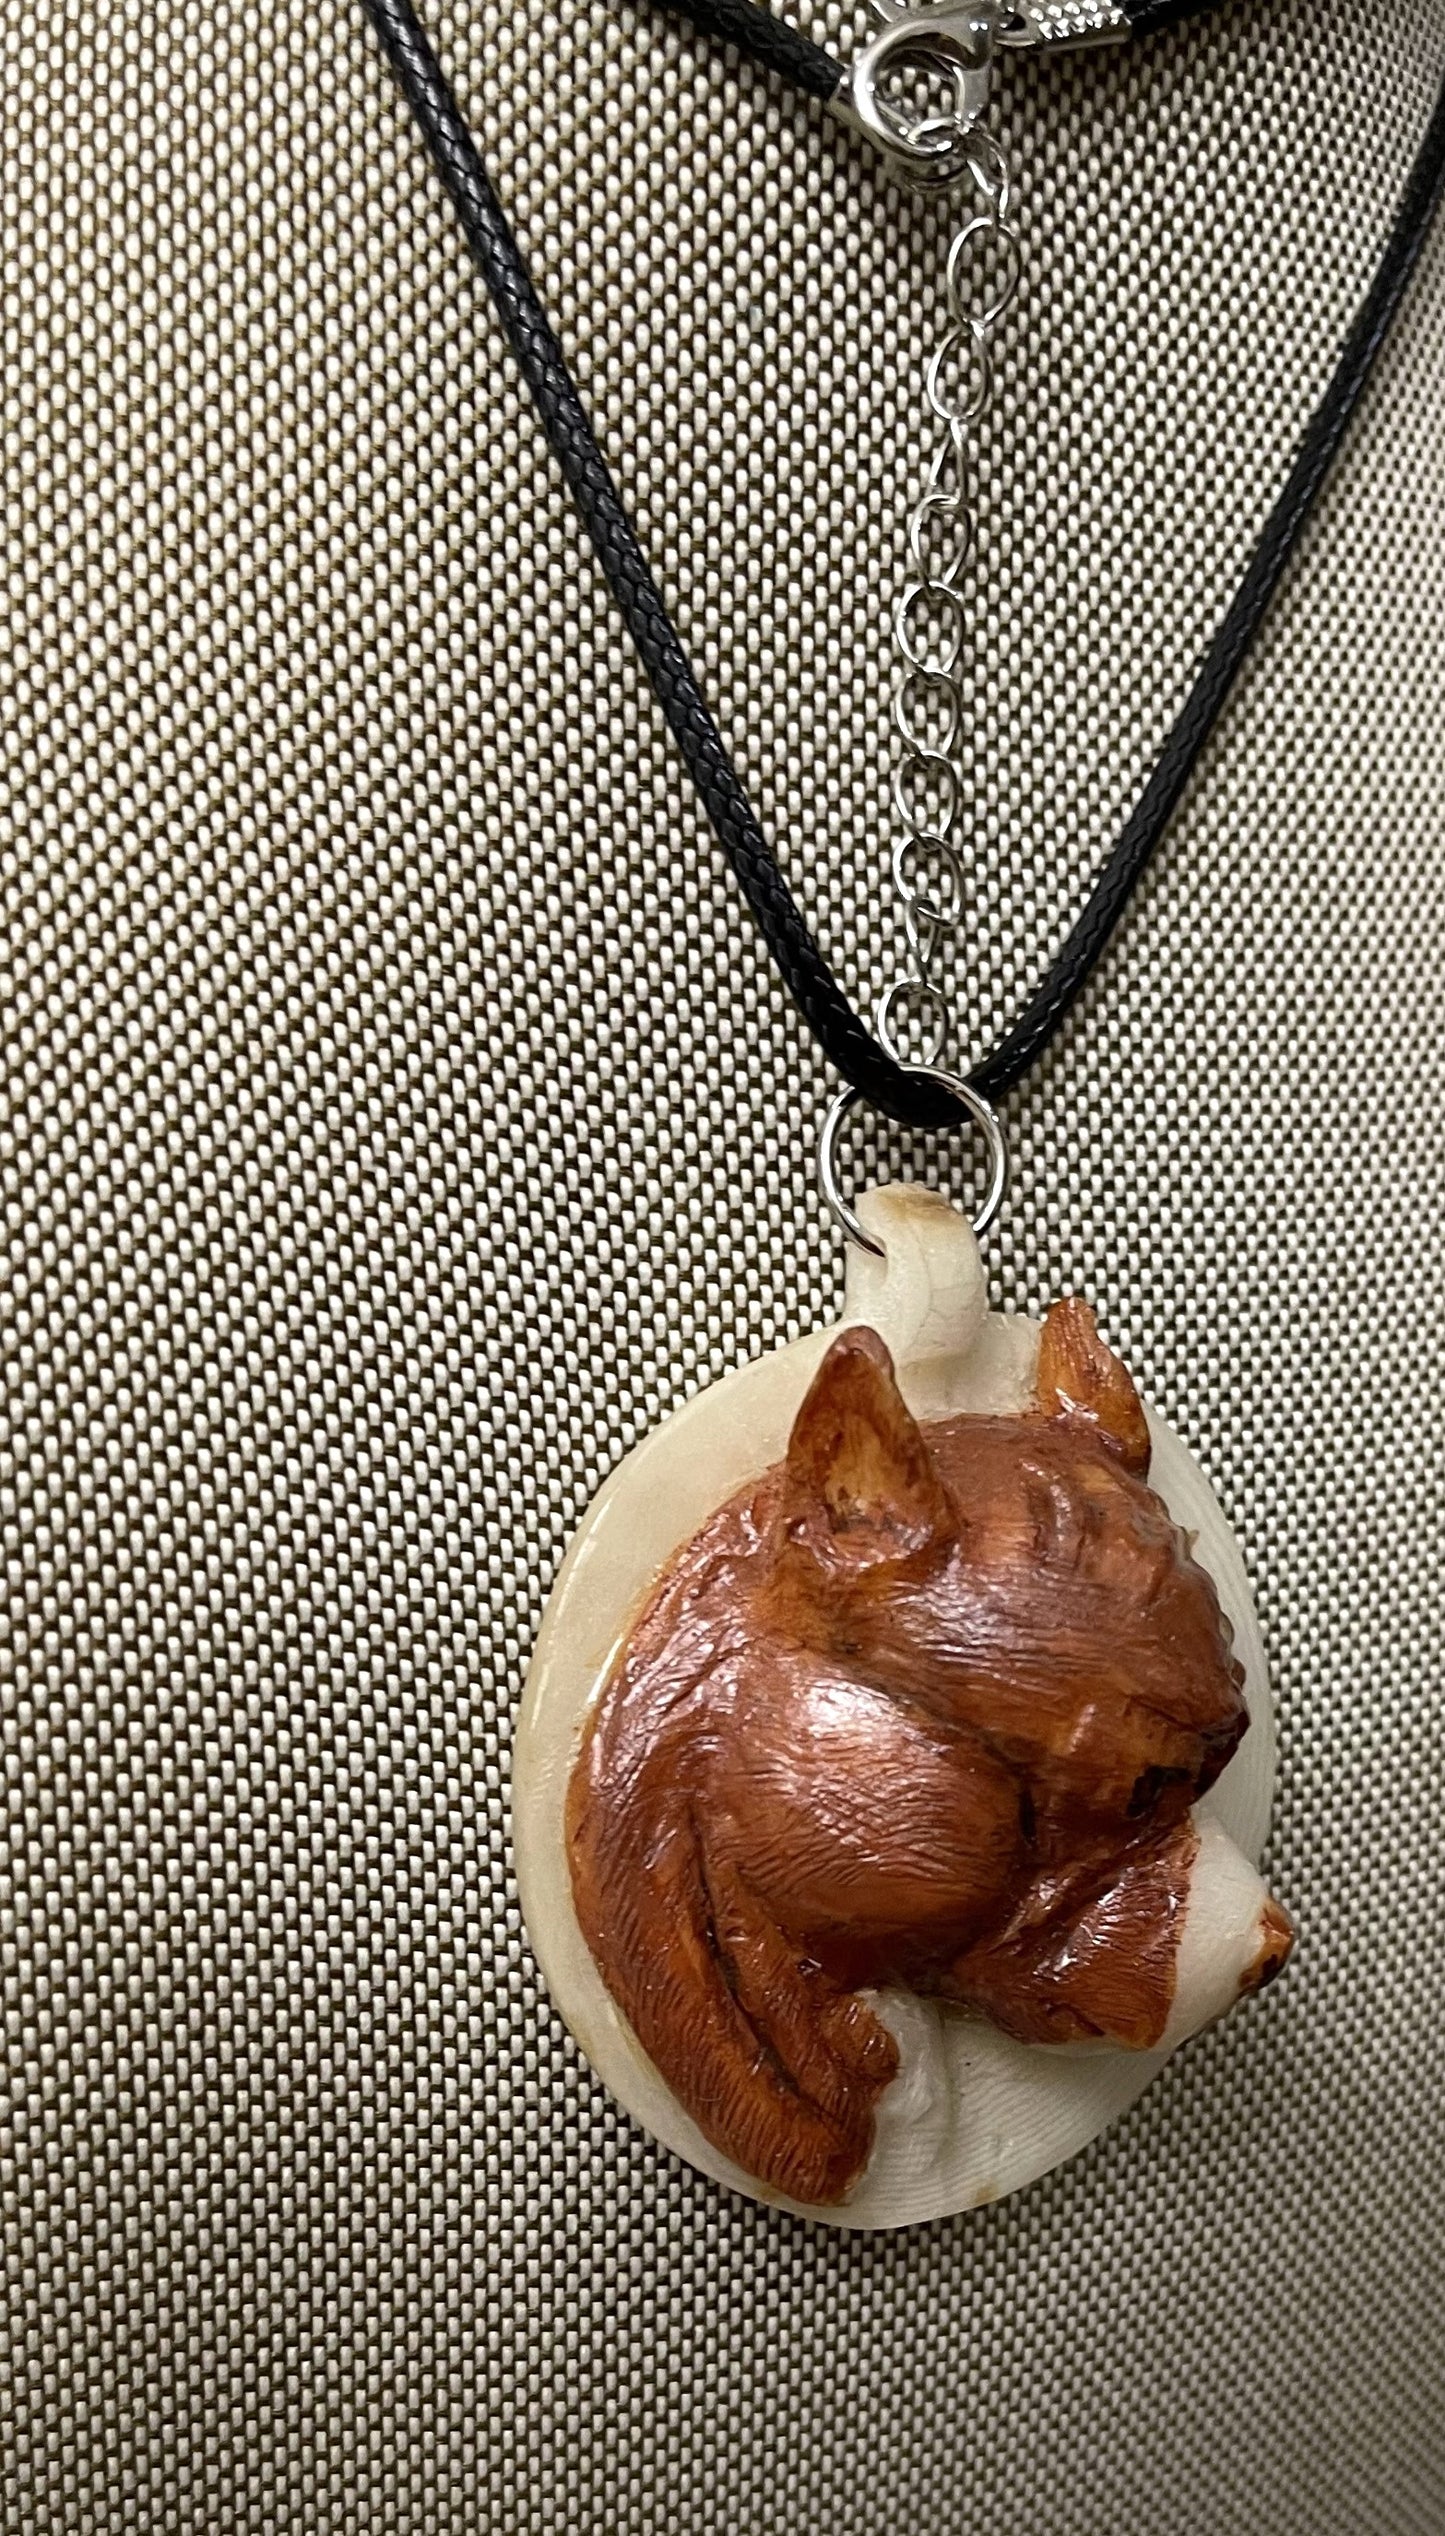 Pit Bull Dog Tagua Carved Necklace Pendant Panama